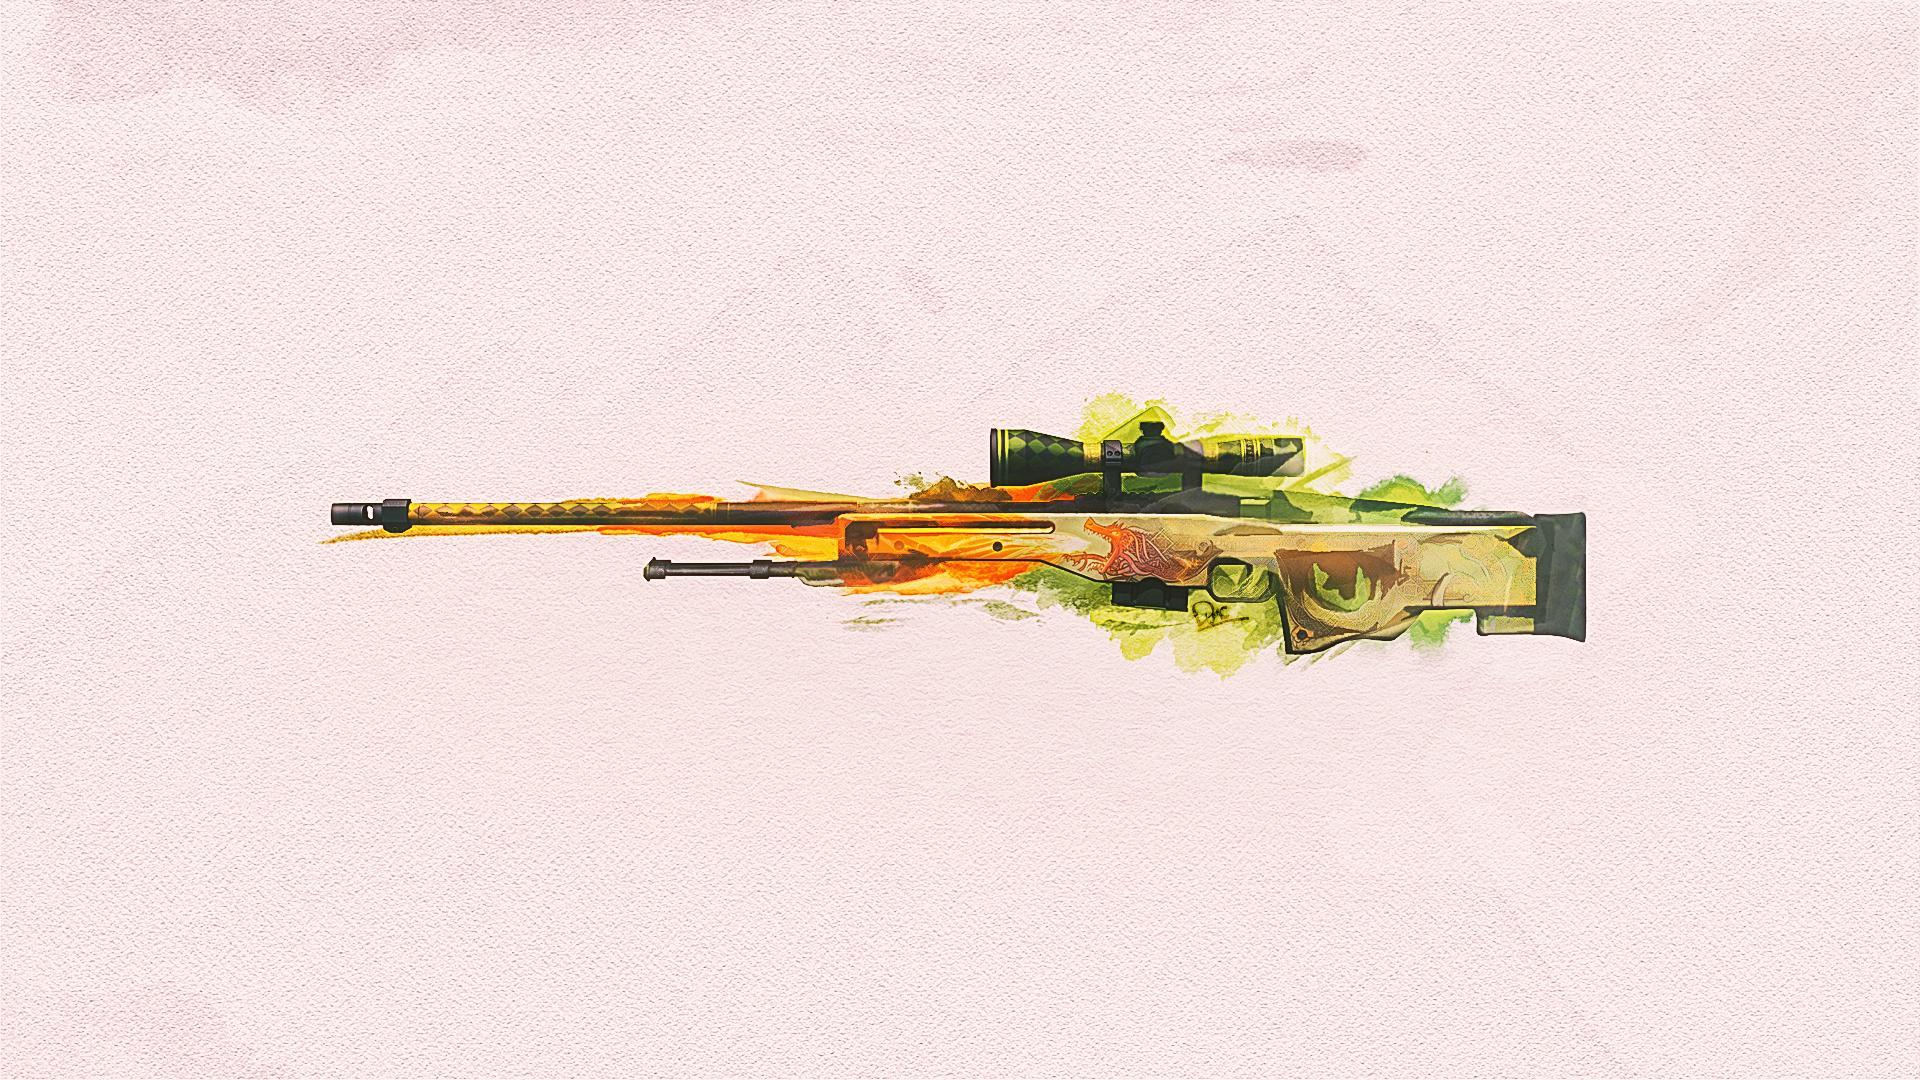 Wallpaper Sniper Rifle Weapons Cs Go Background Weapon